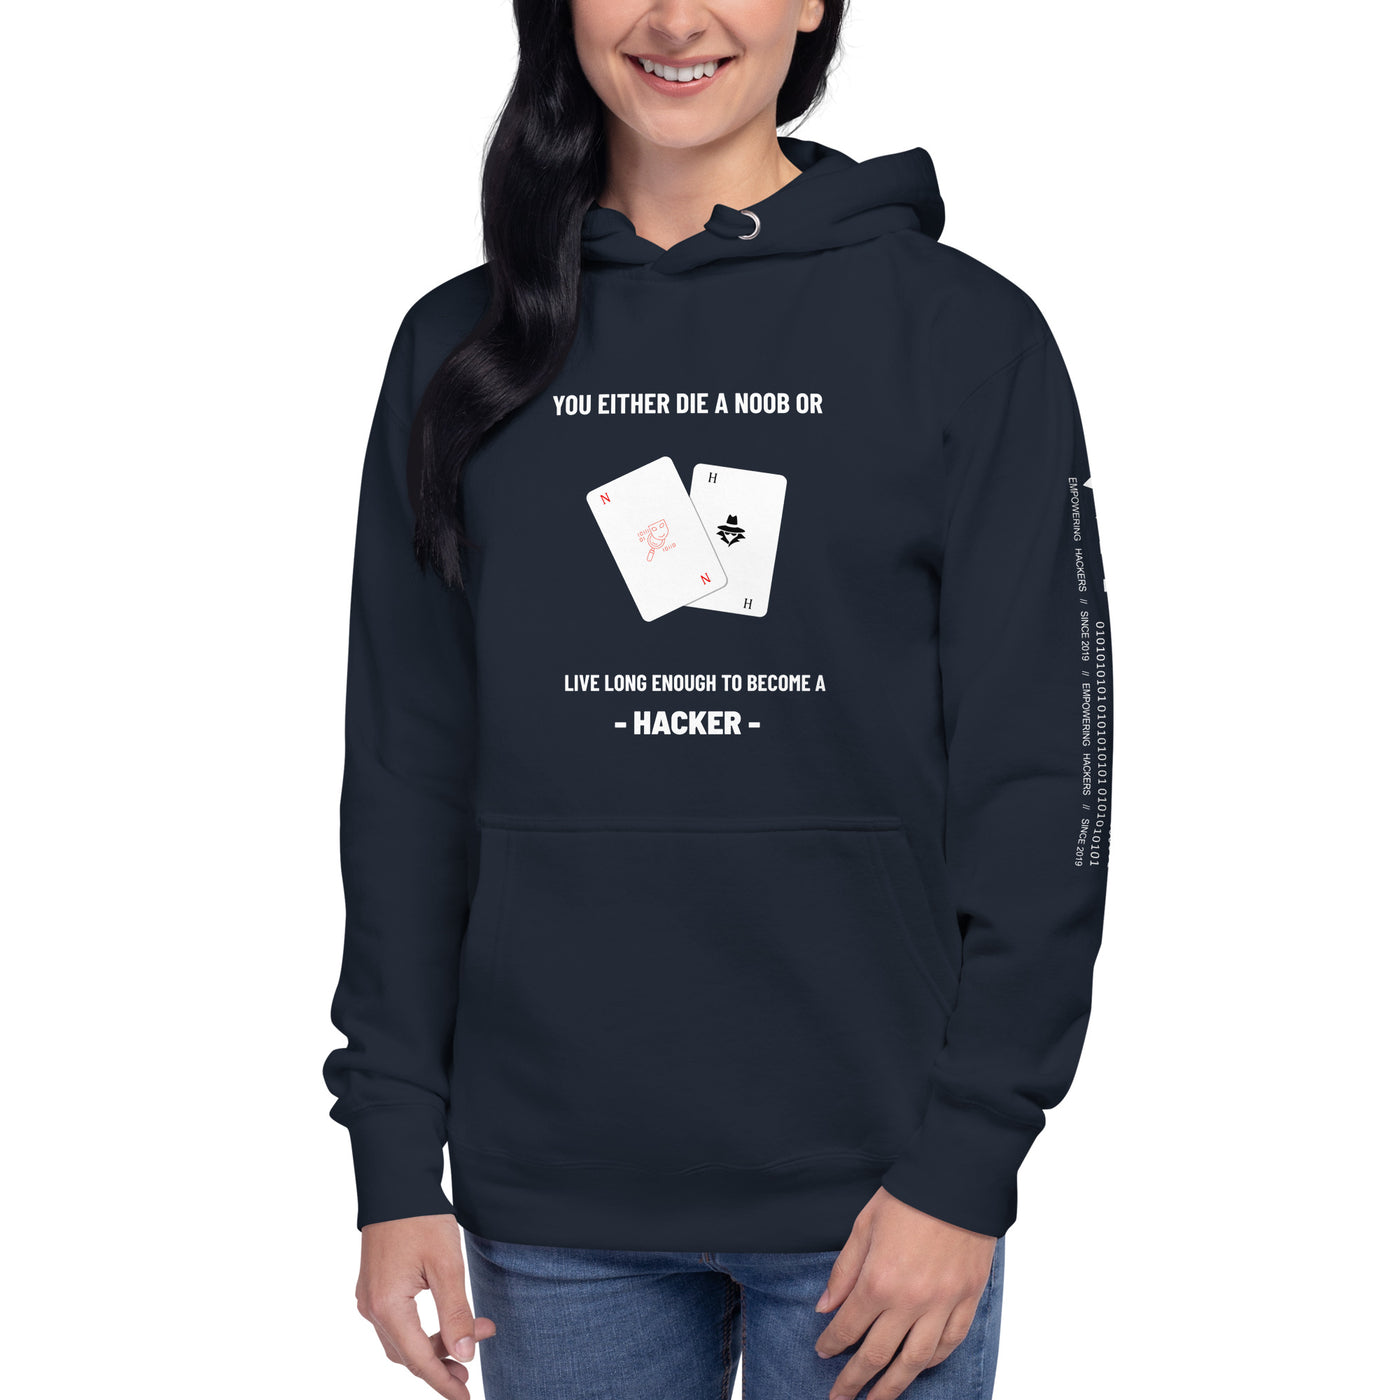 You either die a noob or live long enough to become a hacker - Unisex Hoodie